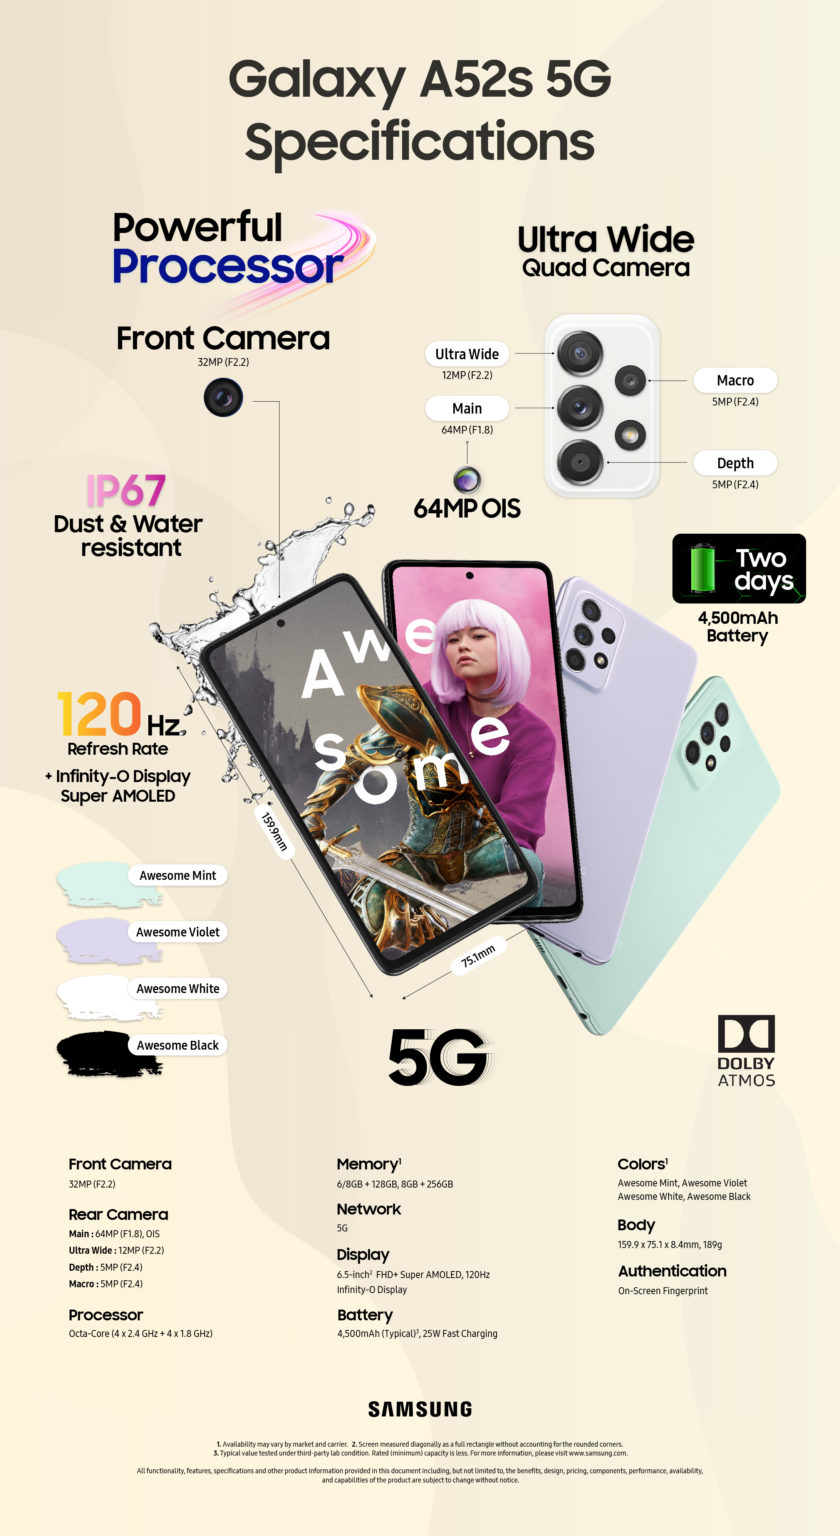 Samsung Galaxy A52s 5G Specs and Price in Nigeria - Dignited